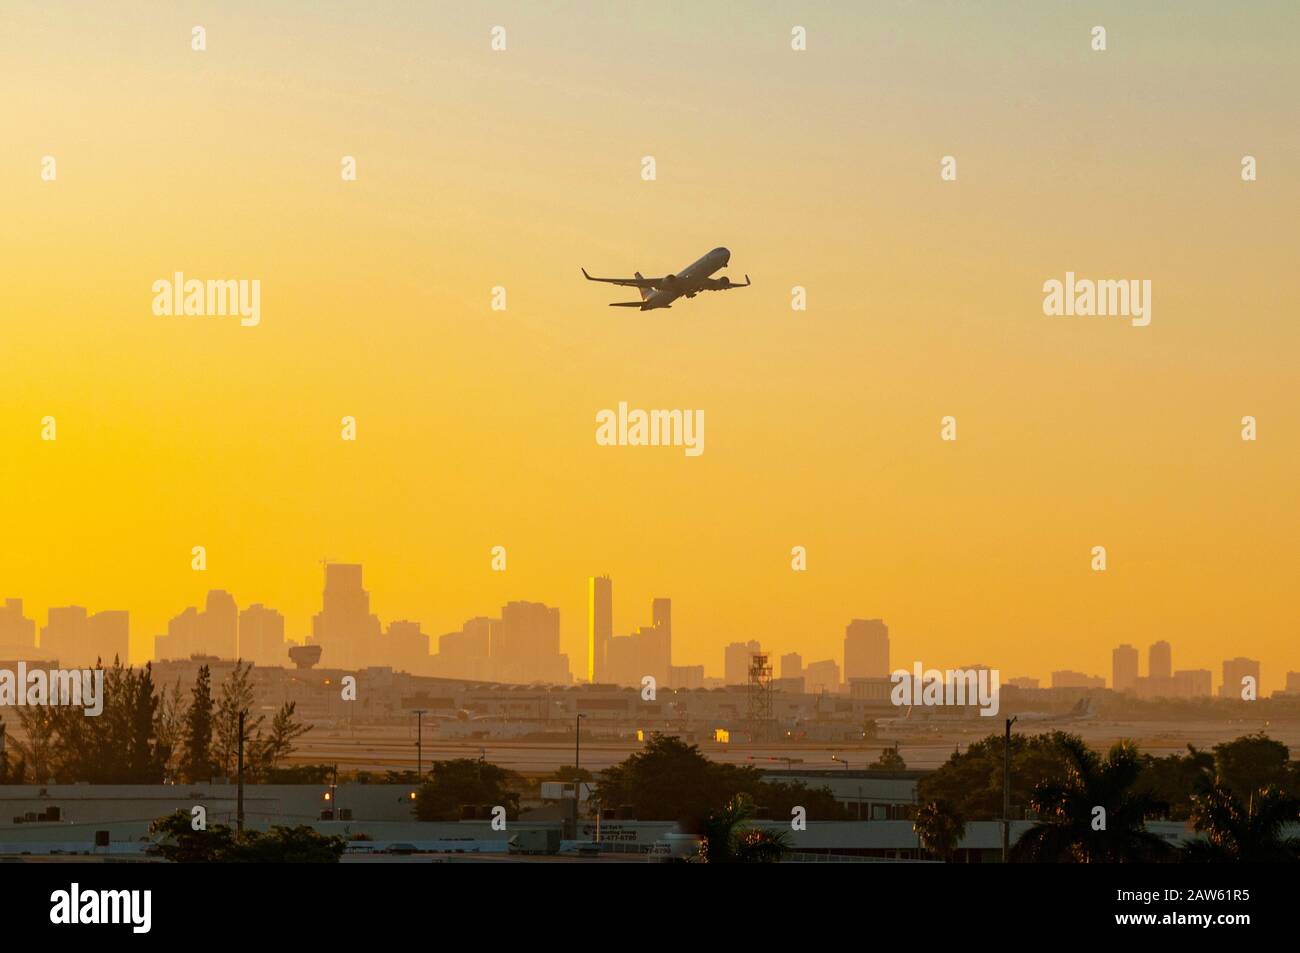 A plane is silhouetted against a colorful Yellow and Orange sunrise as it takes off from the Miami airport with the city in the background. Stock Photo